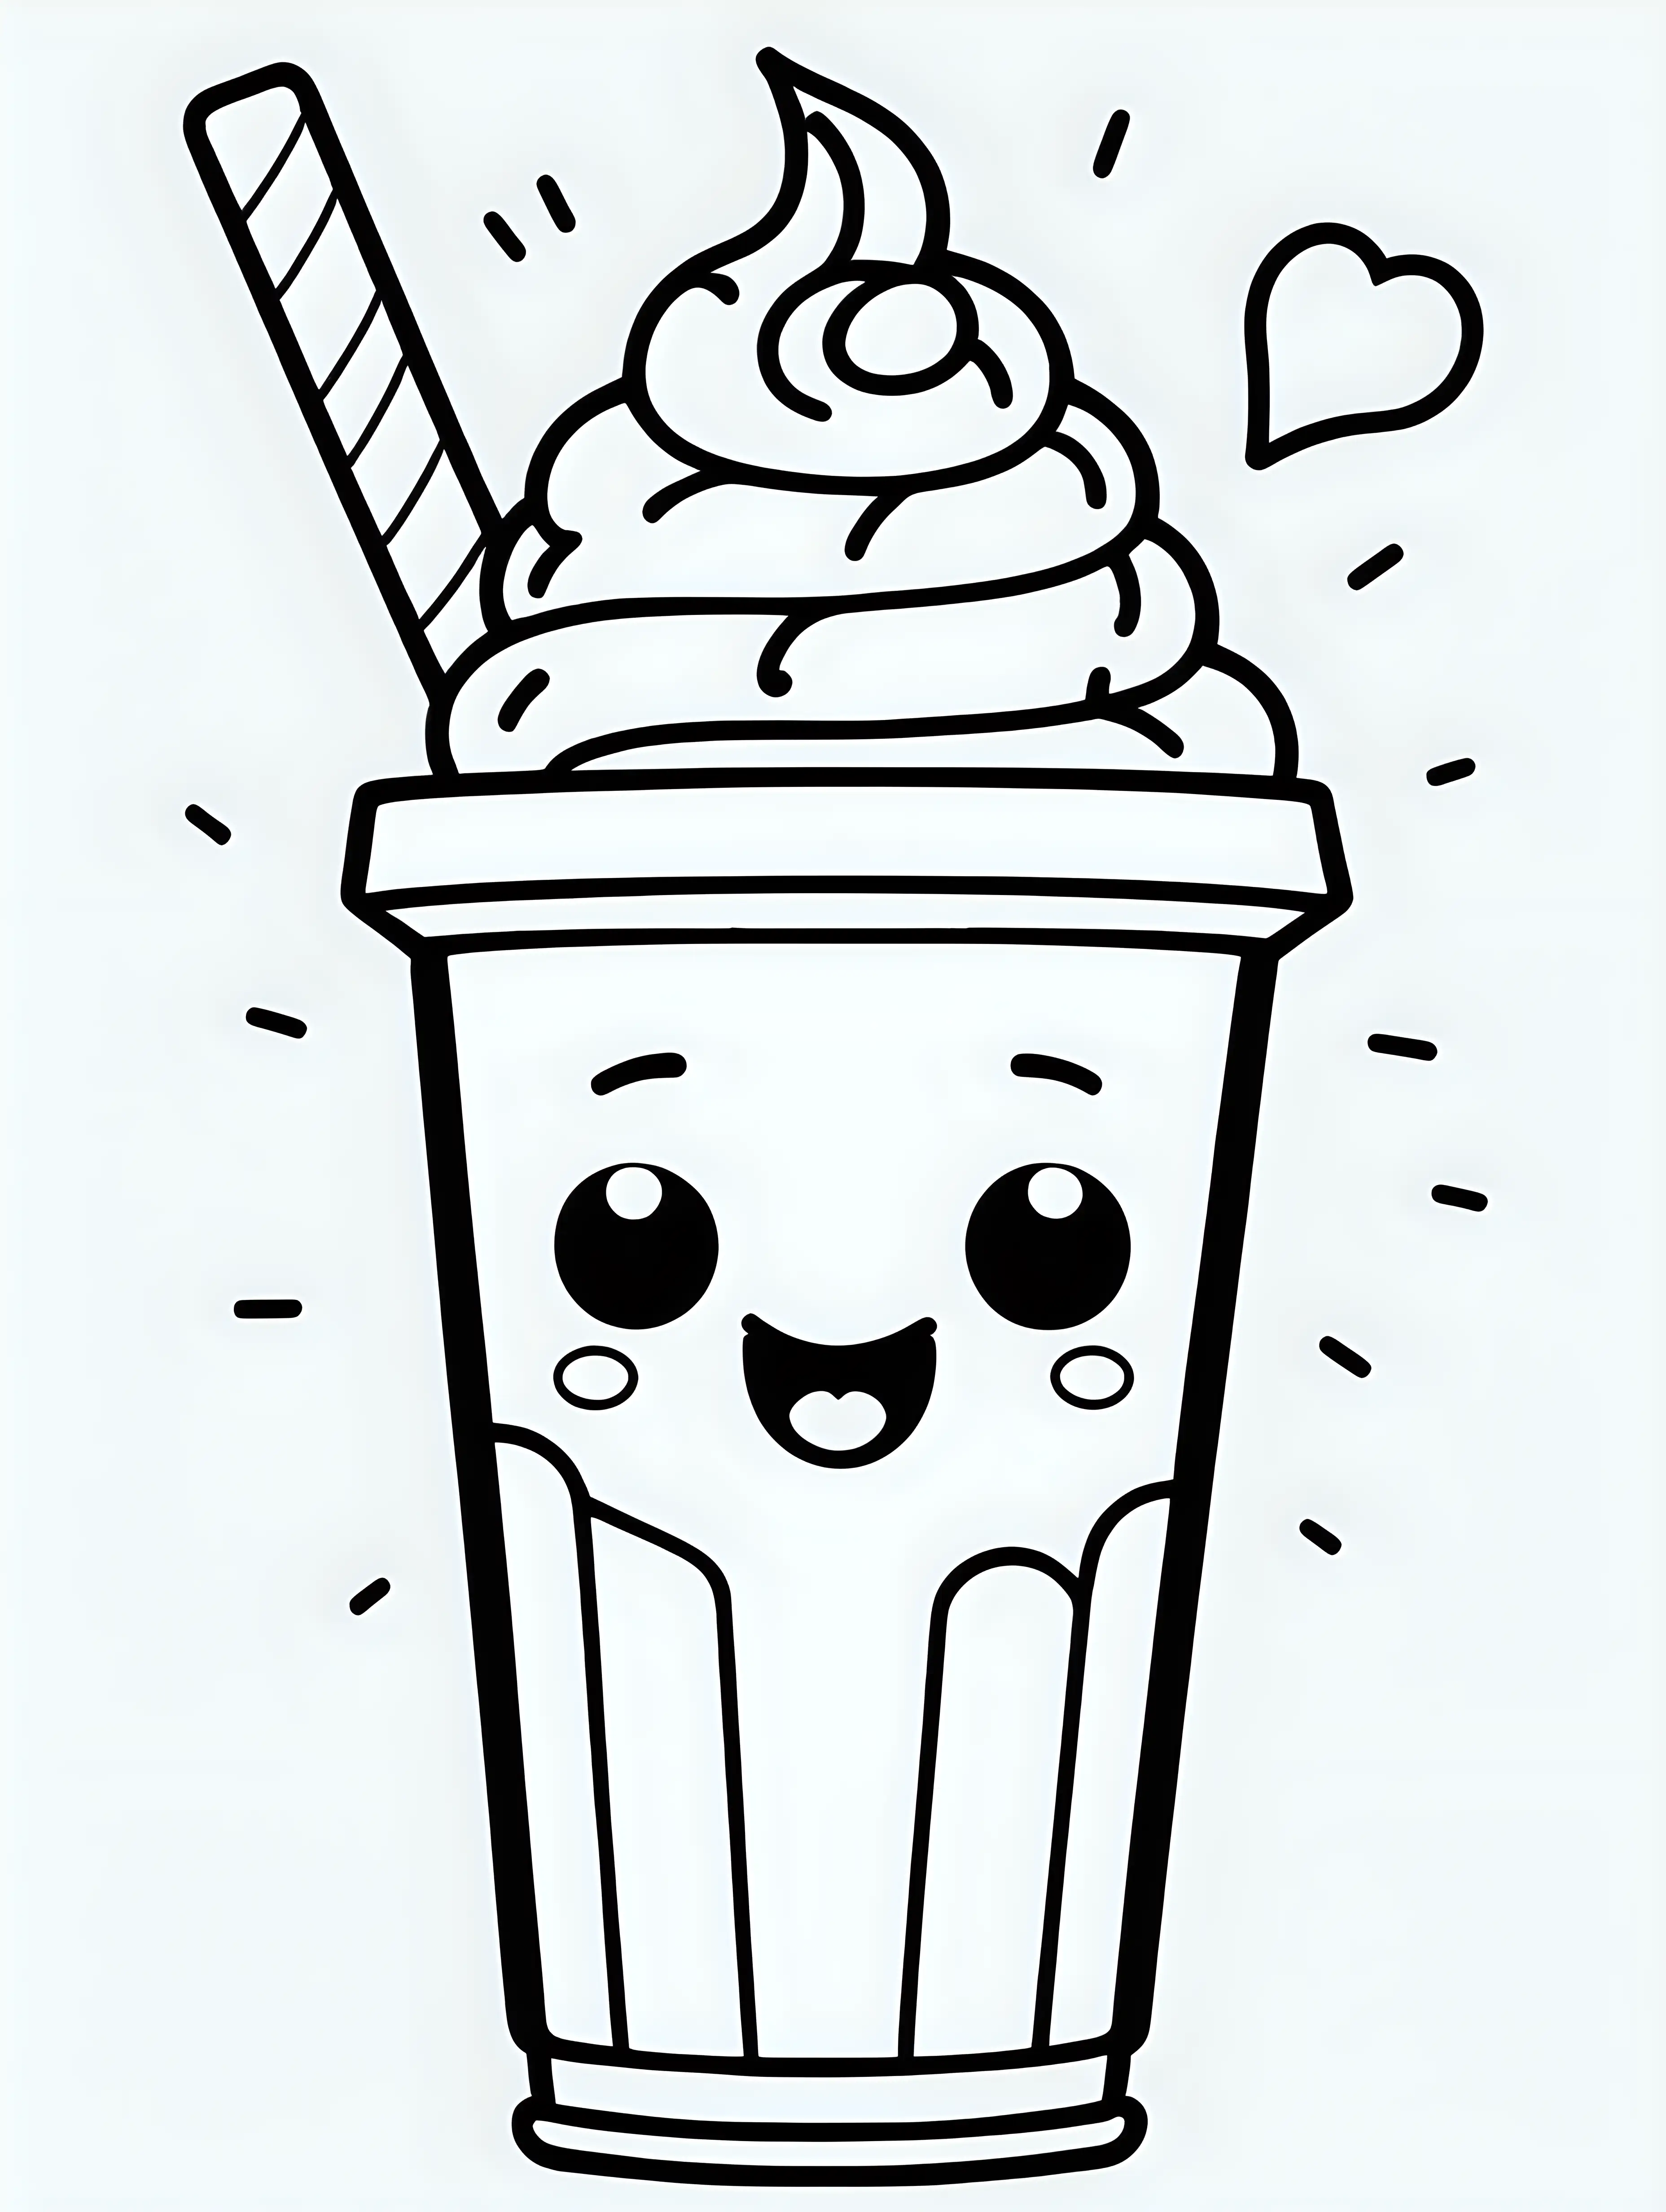 Adorable Cartoon Milkshake Coloring Page on a Clean White Background